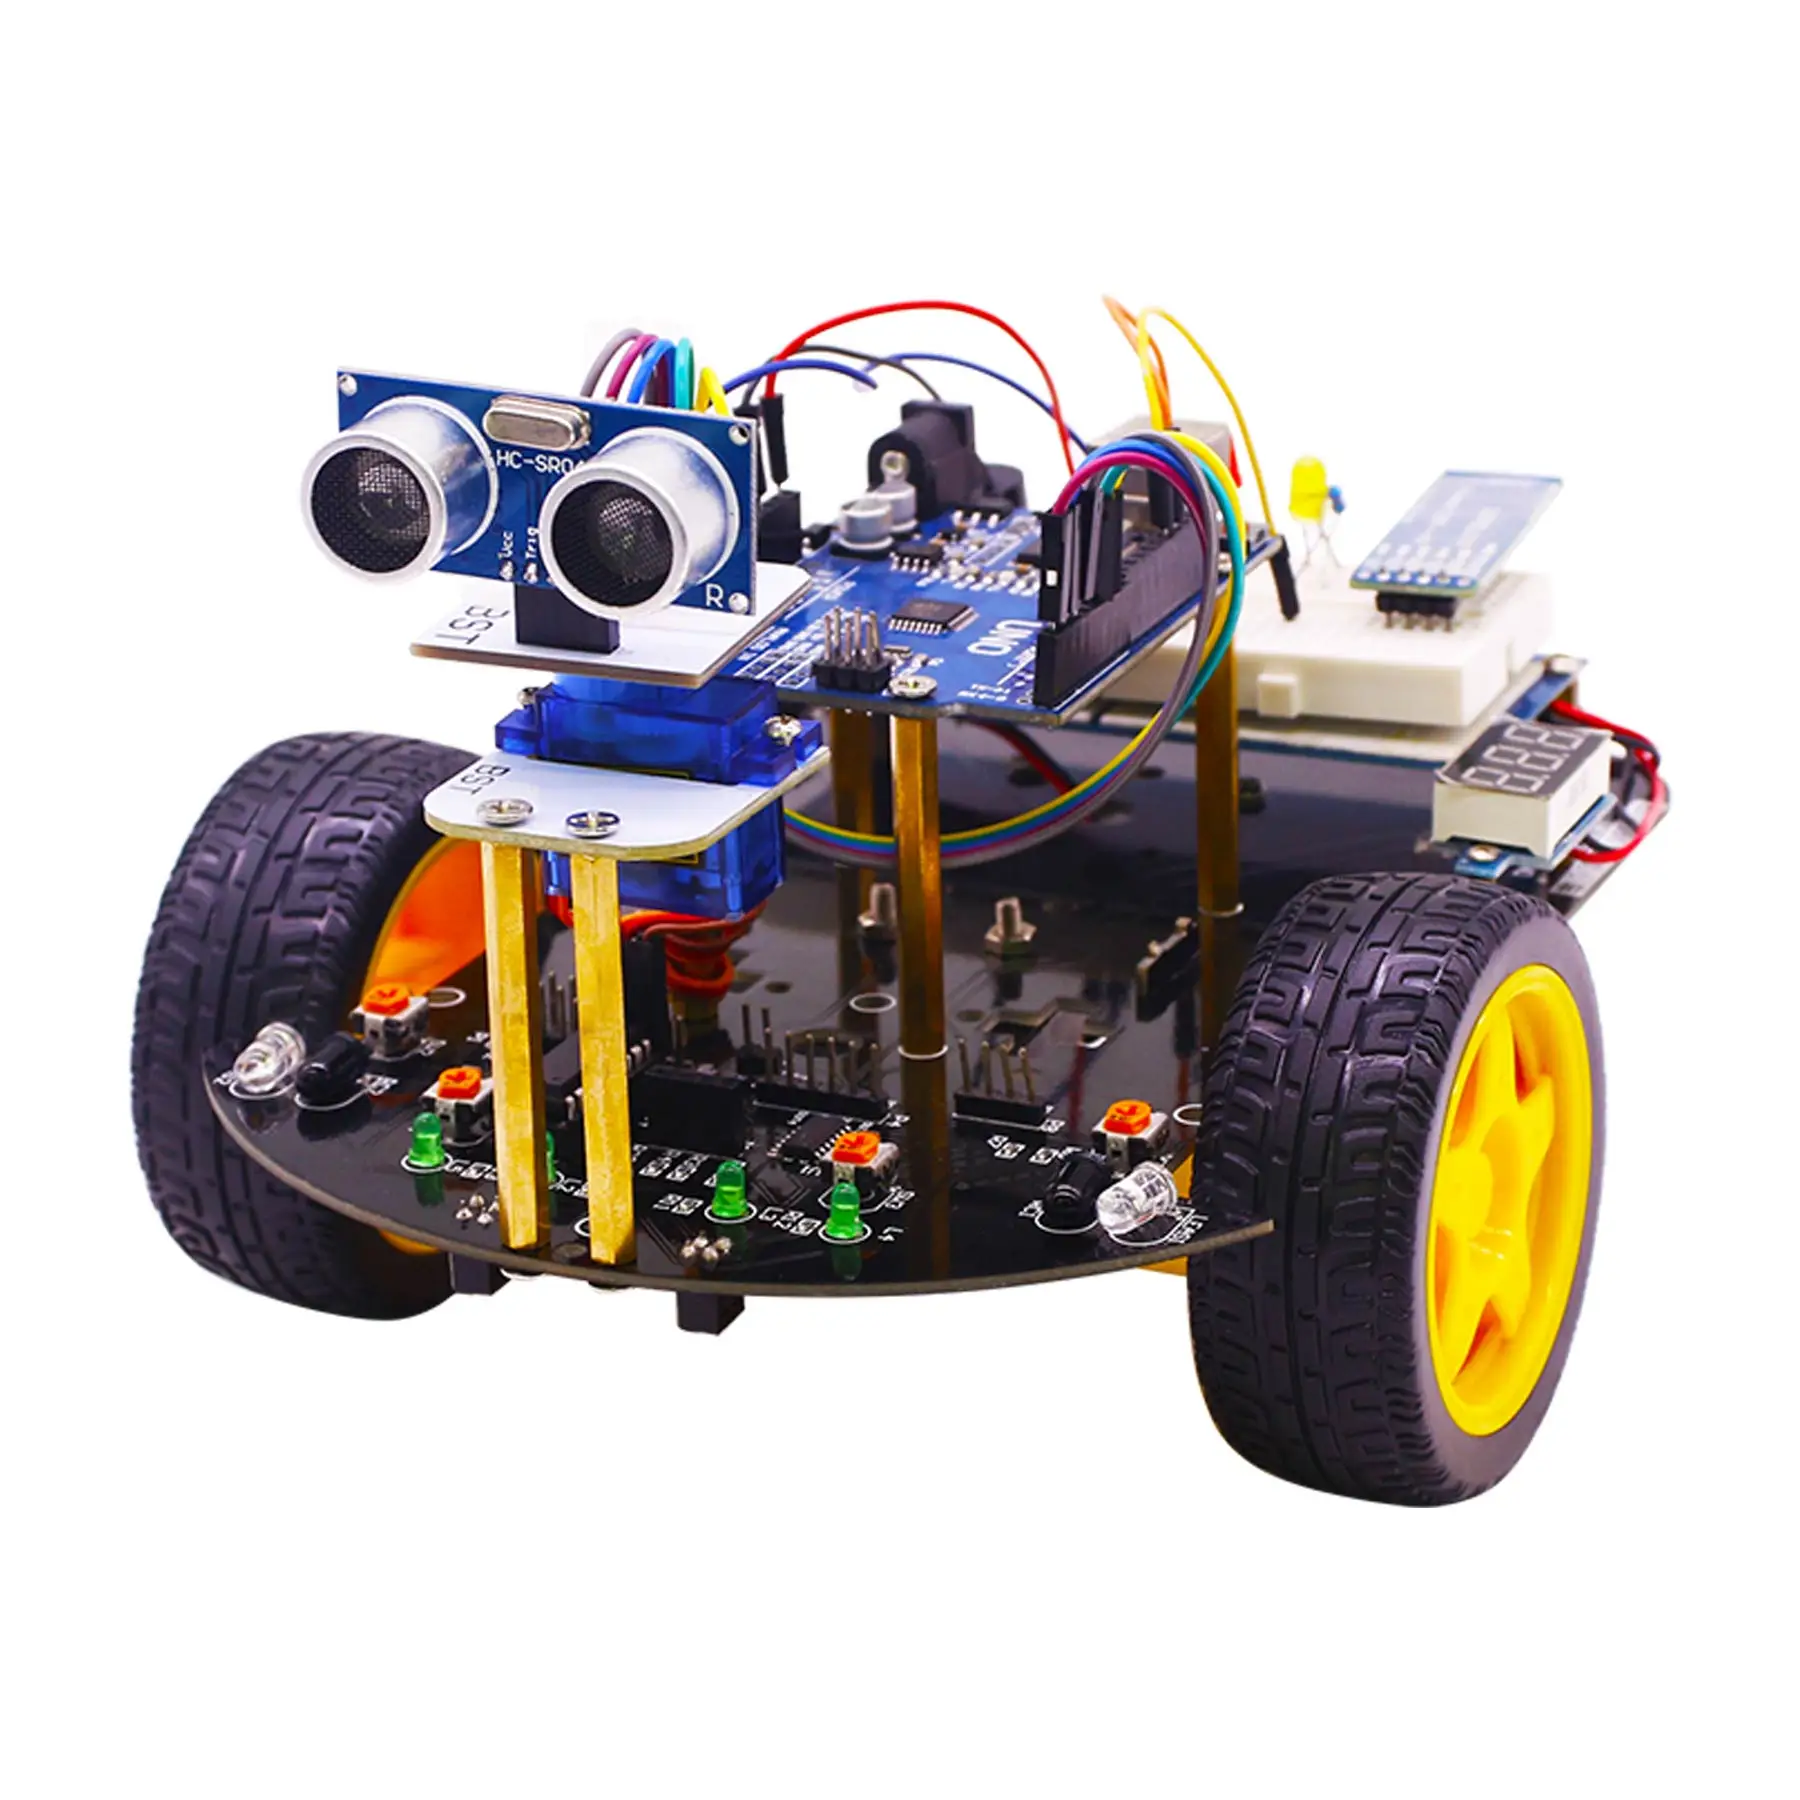 Yahboom Smartduino Robot Car Sensor Module 2 in 1 DIY ELECTRON KIT Support Scratch3.0 Mixly Graphical Programming  for Children